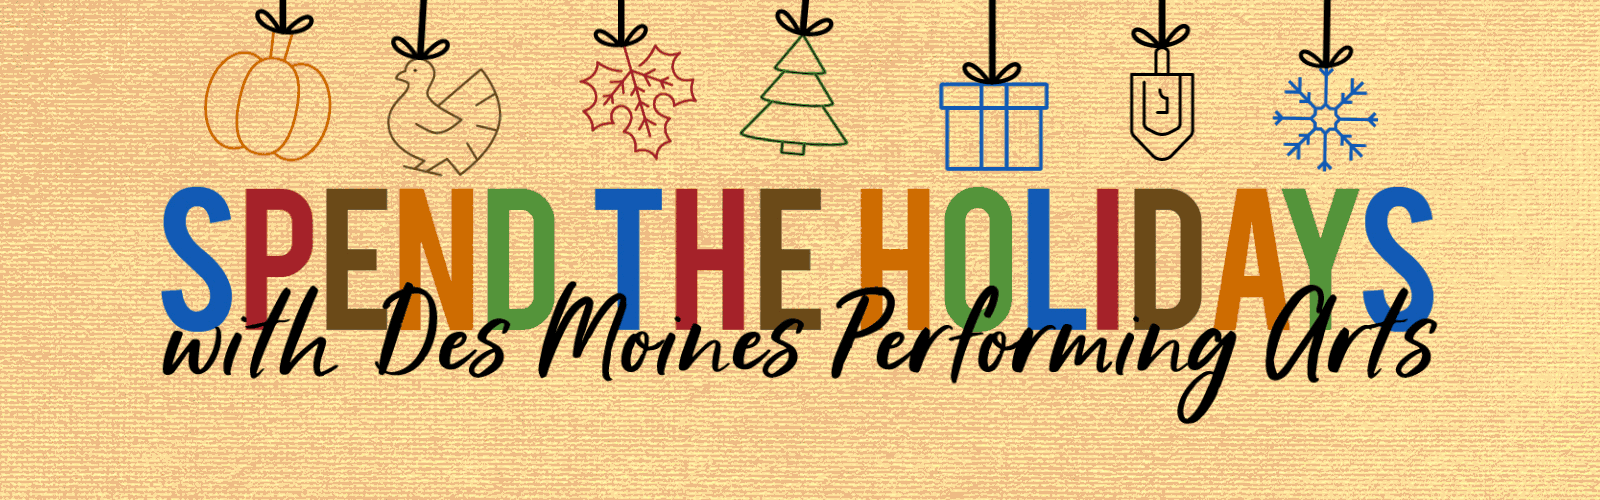 Spend the holidays with Des Moines Performing Arts